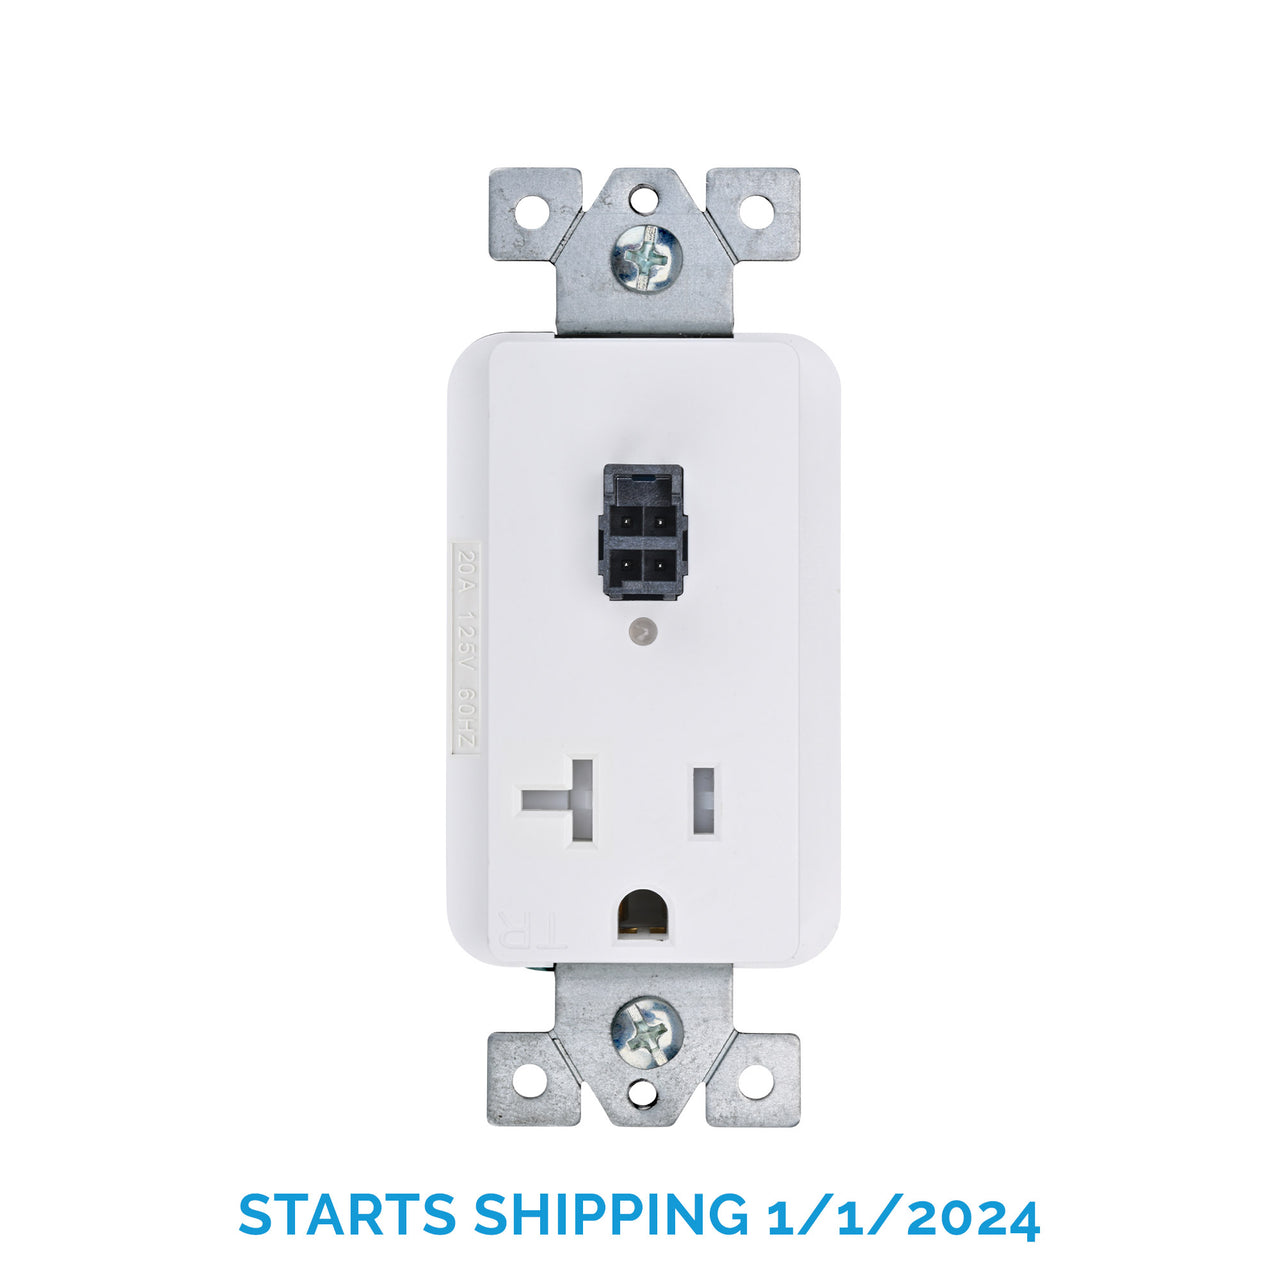 Replacement Safety Interlock Outlet